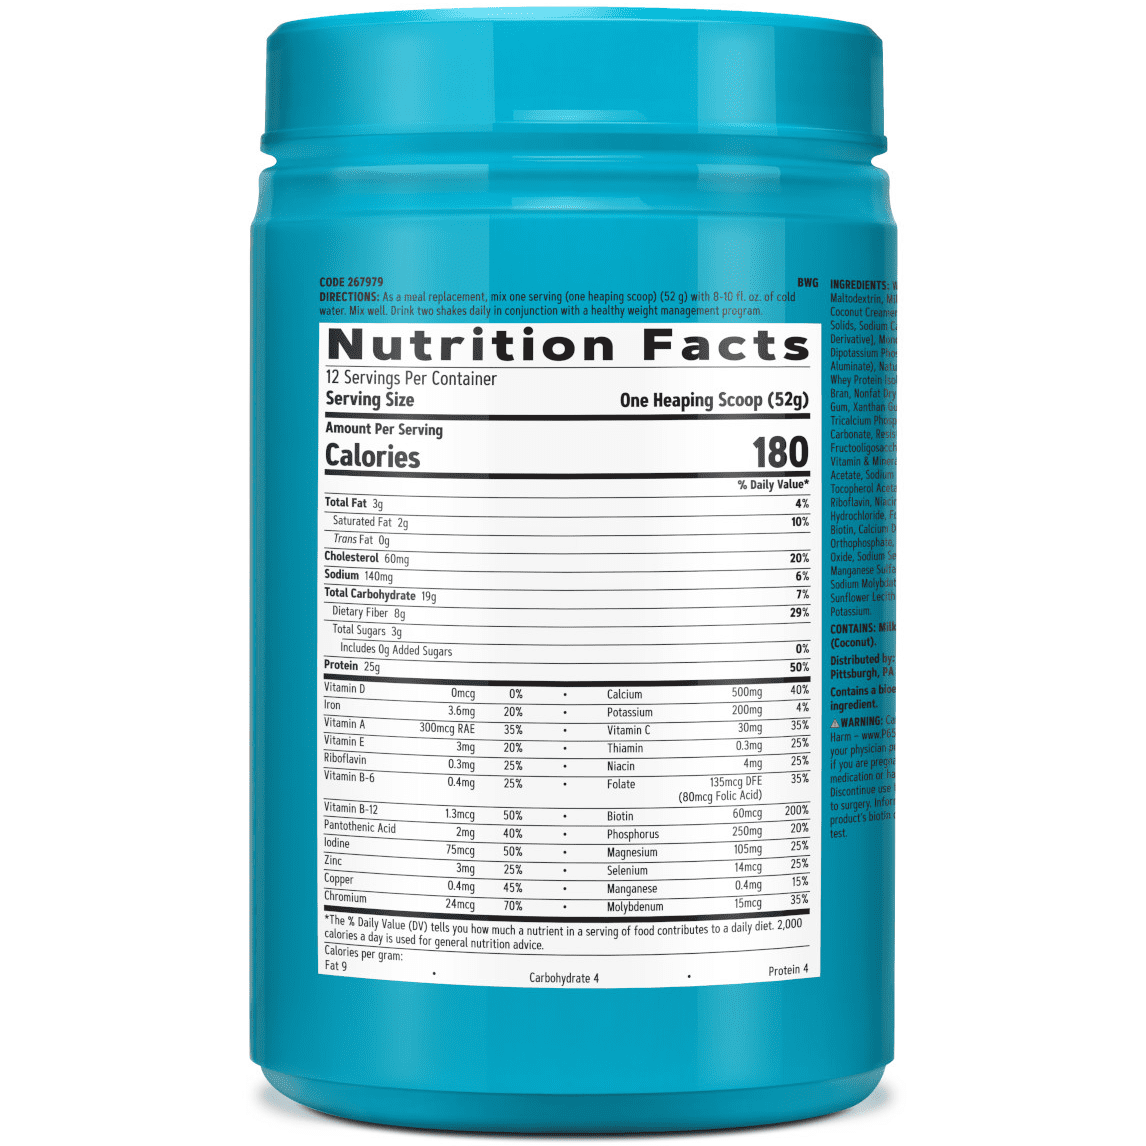  GNC Total Lean Lean Shake + Slimvance - Strawberry Banana, 20  Servings, Weight Loss Protein Powder with 200mg of Caffeine : Health &  Household